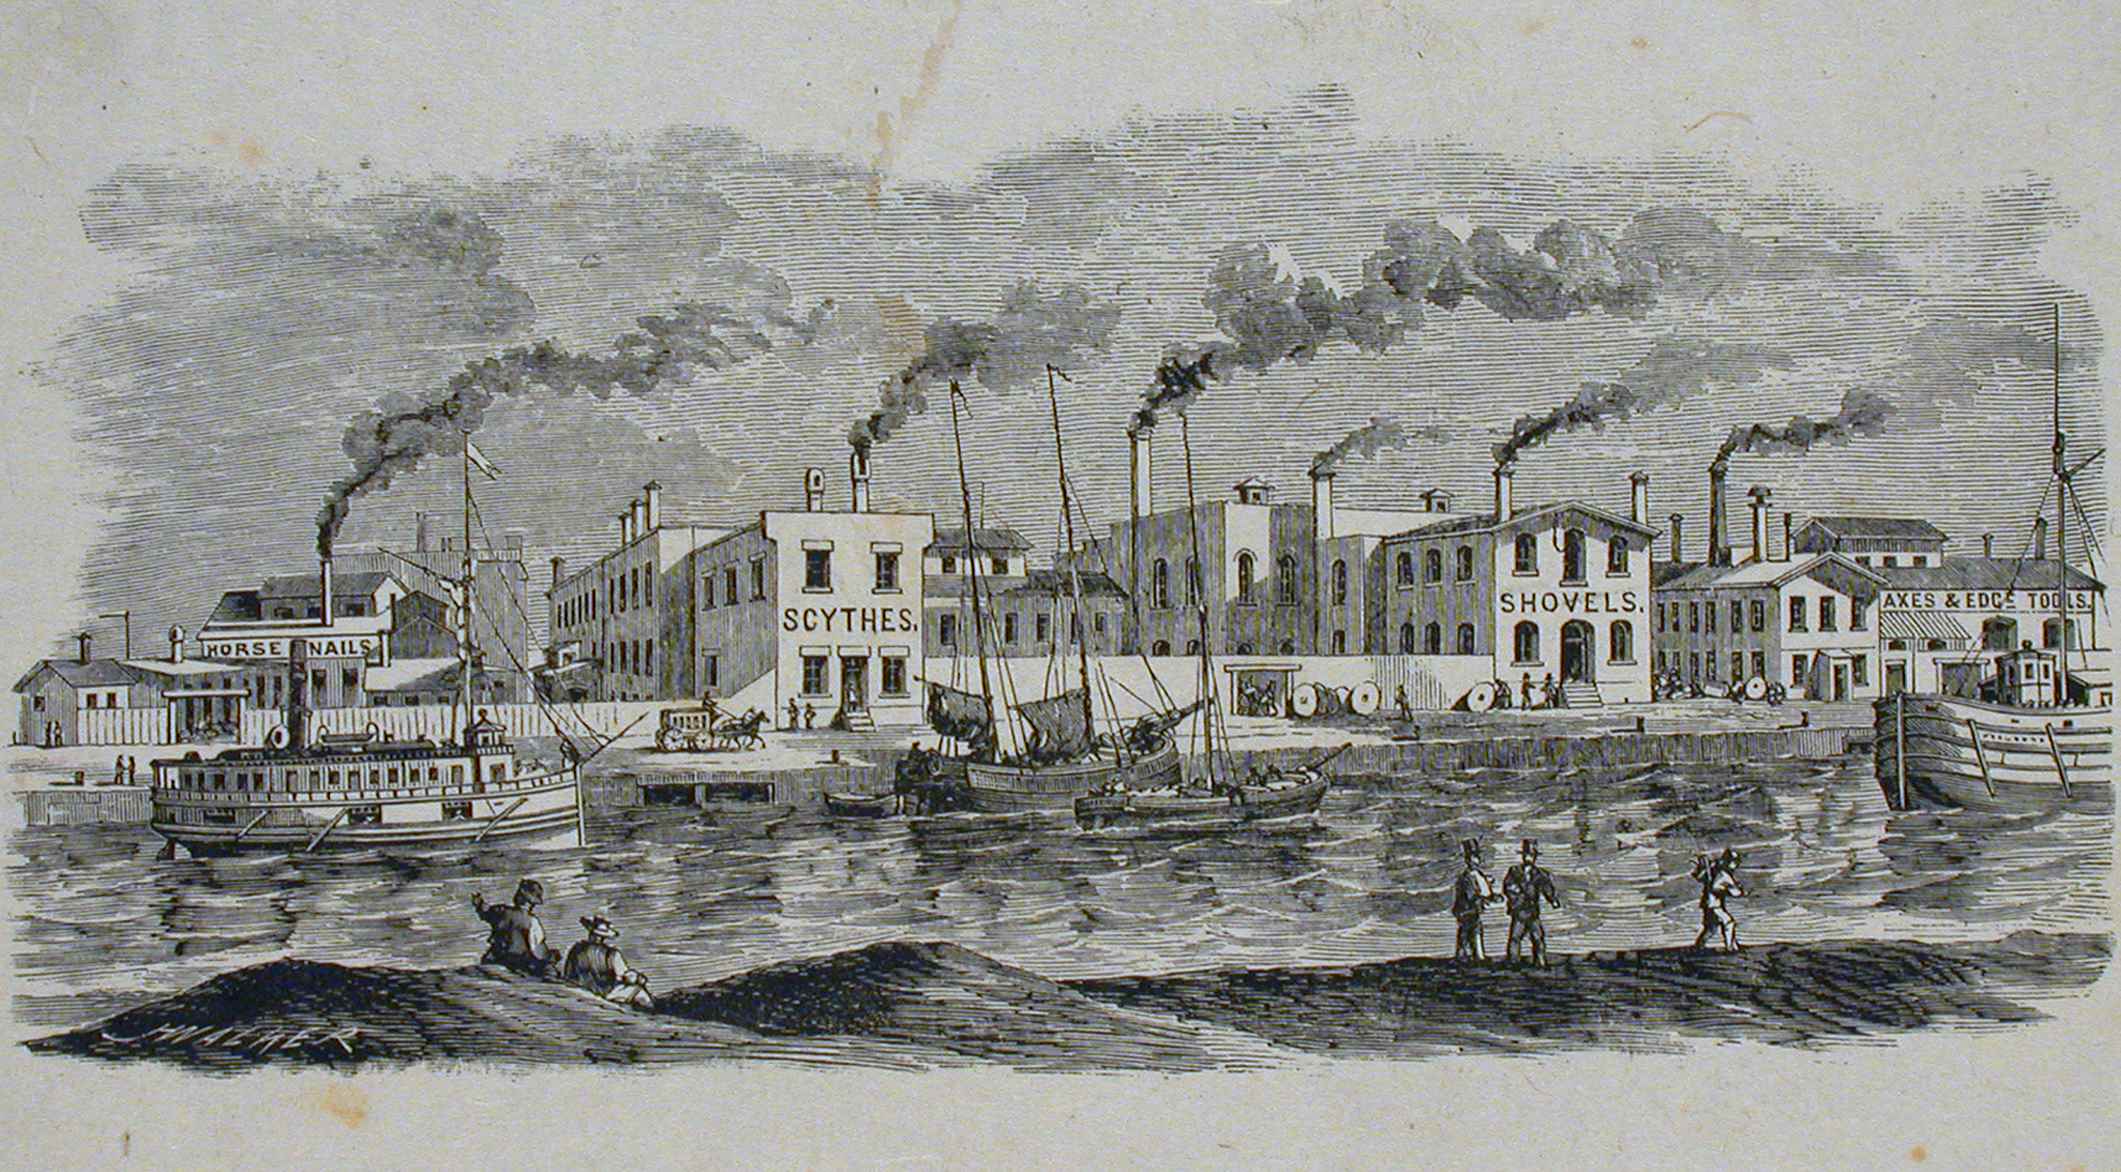 Engraving of factories near a port full of sailing vessels and steam ships.